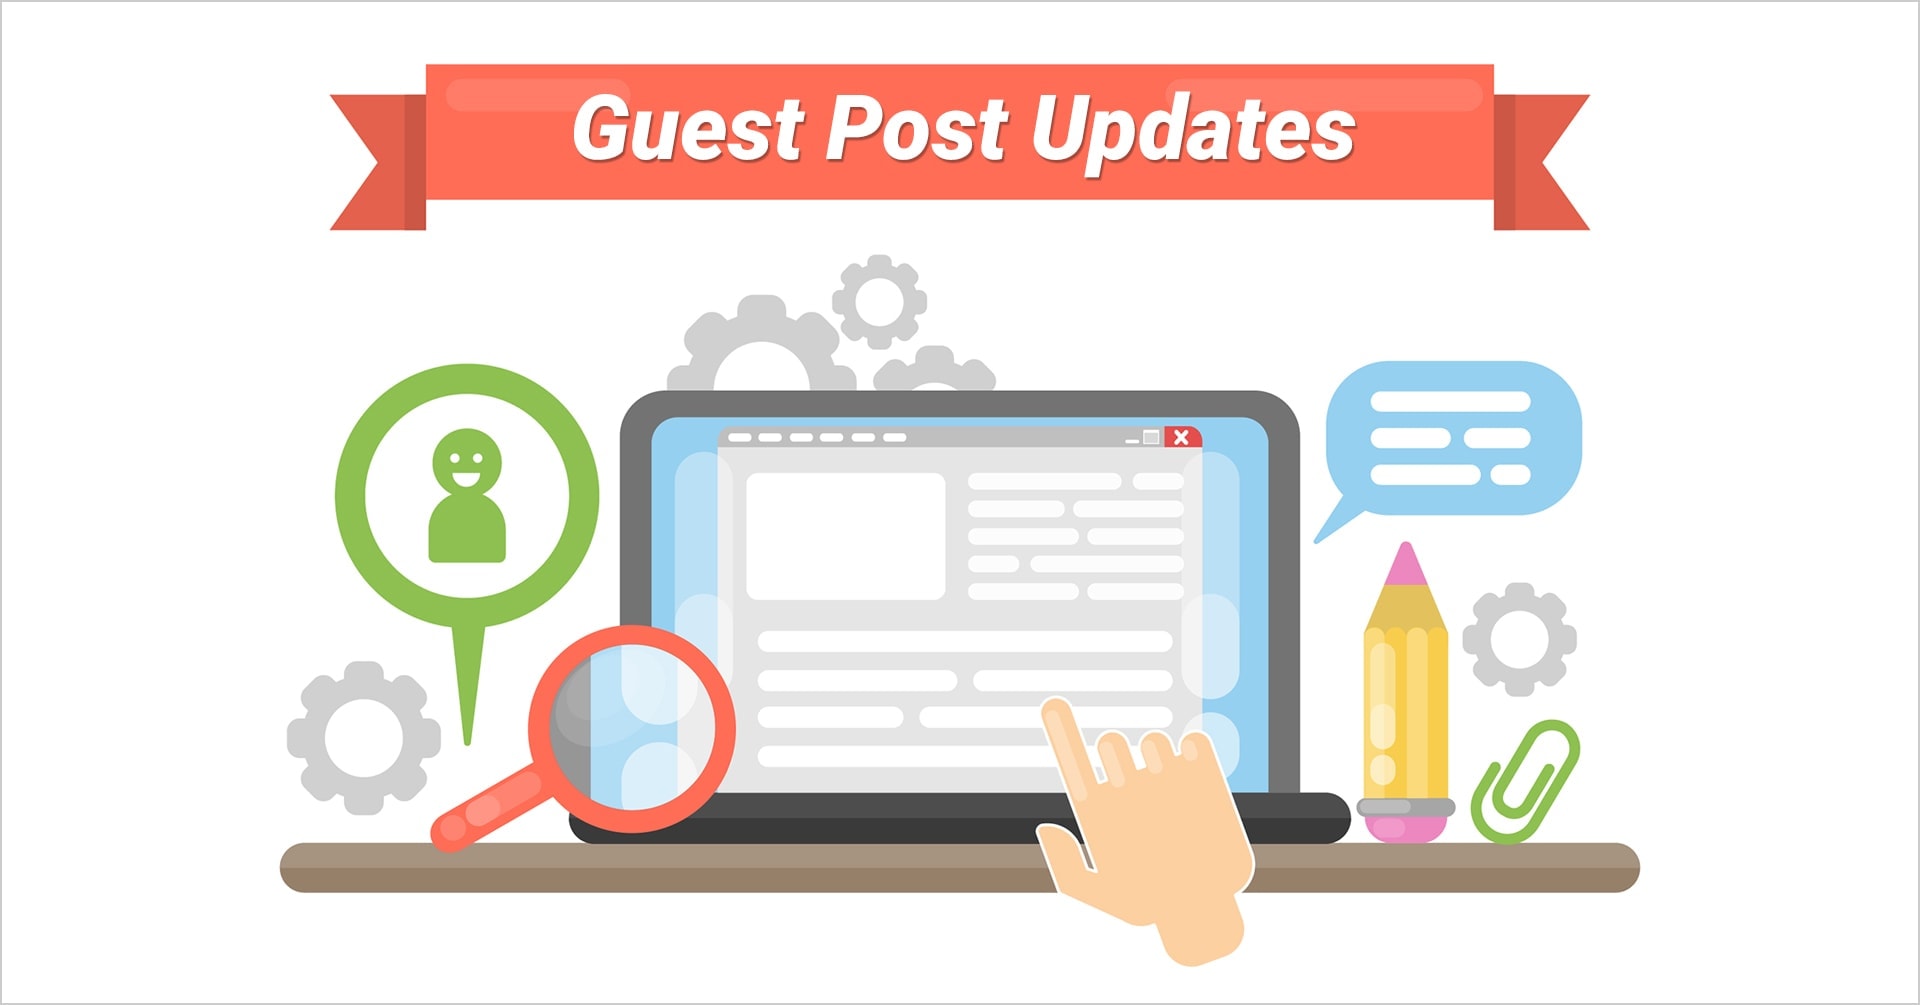 Guest Post Updates, changes to guest post